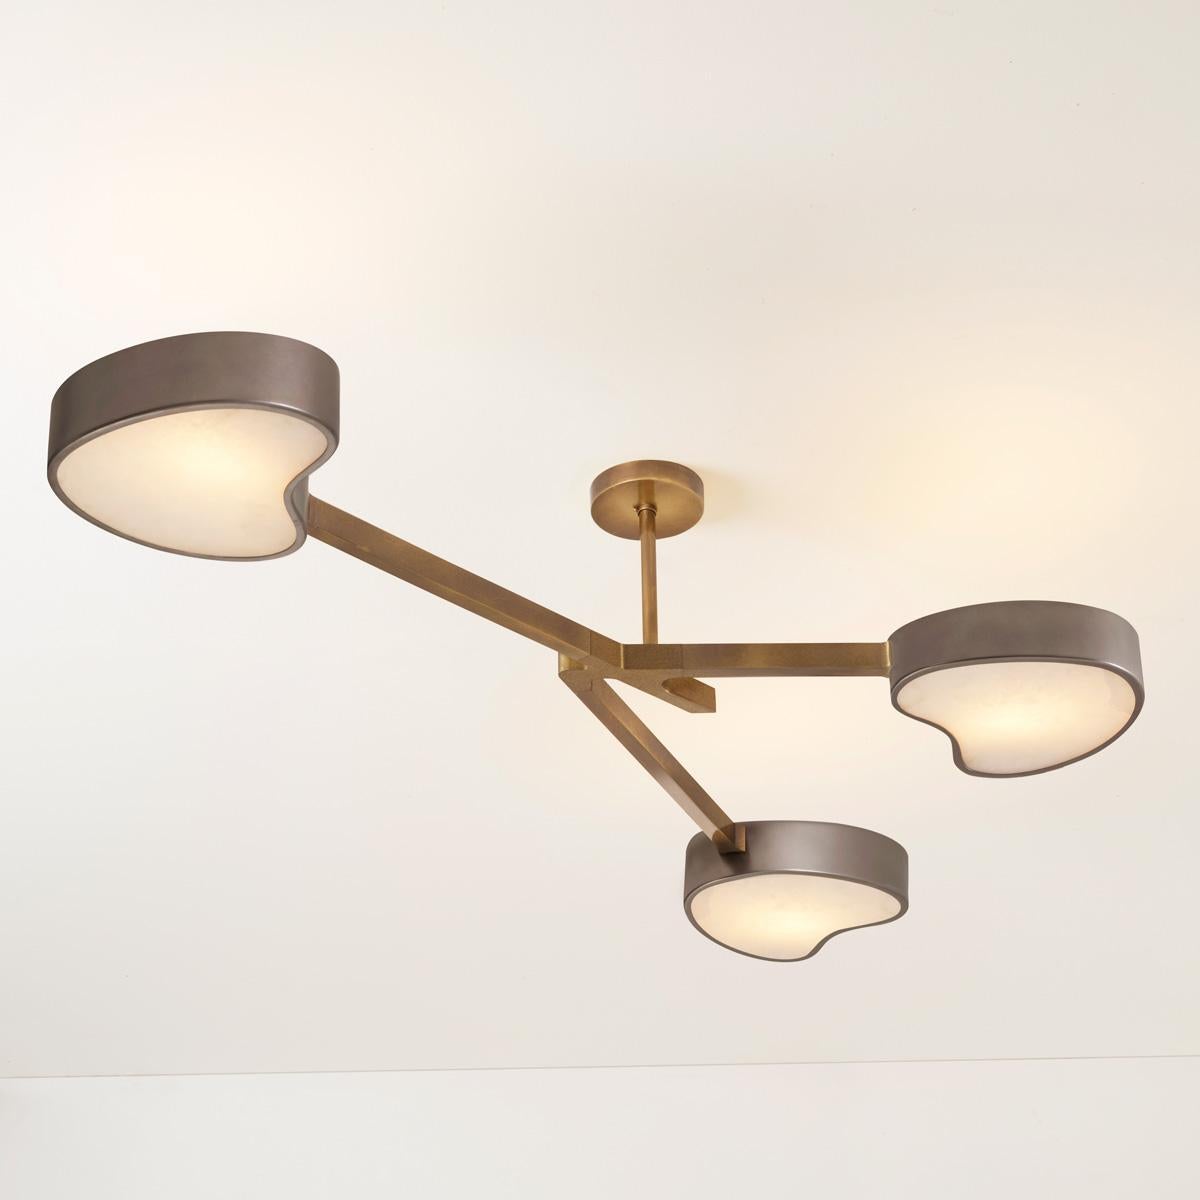 Cuore N.3 Ceiling Light by Gaspare Asaro. Polished Brass Finish For Sale 7